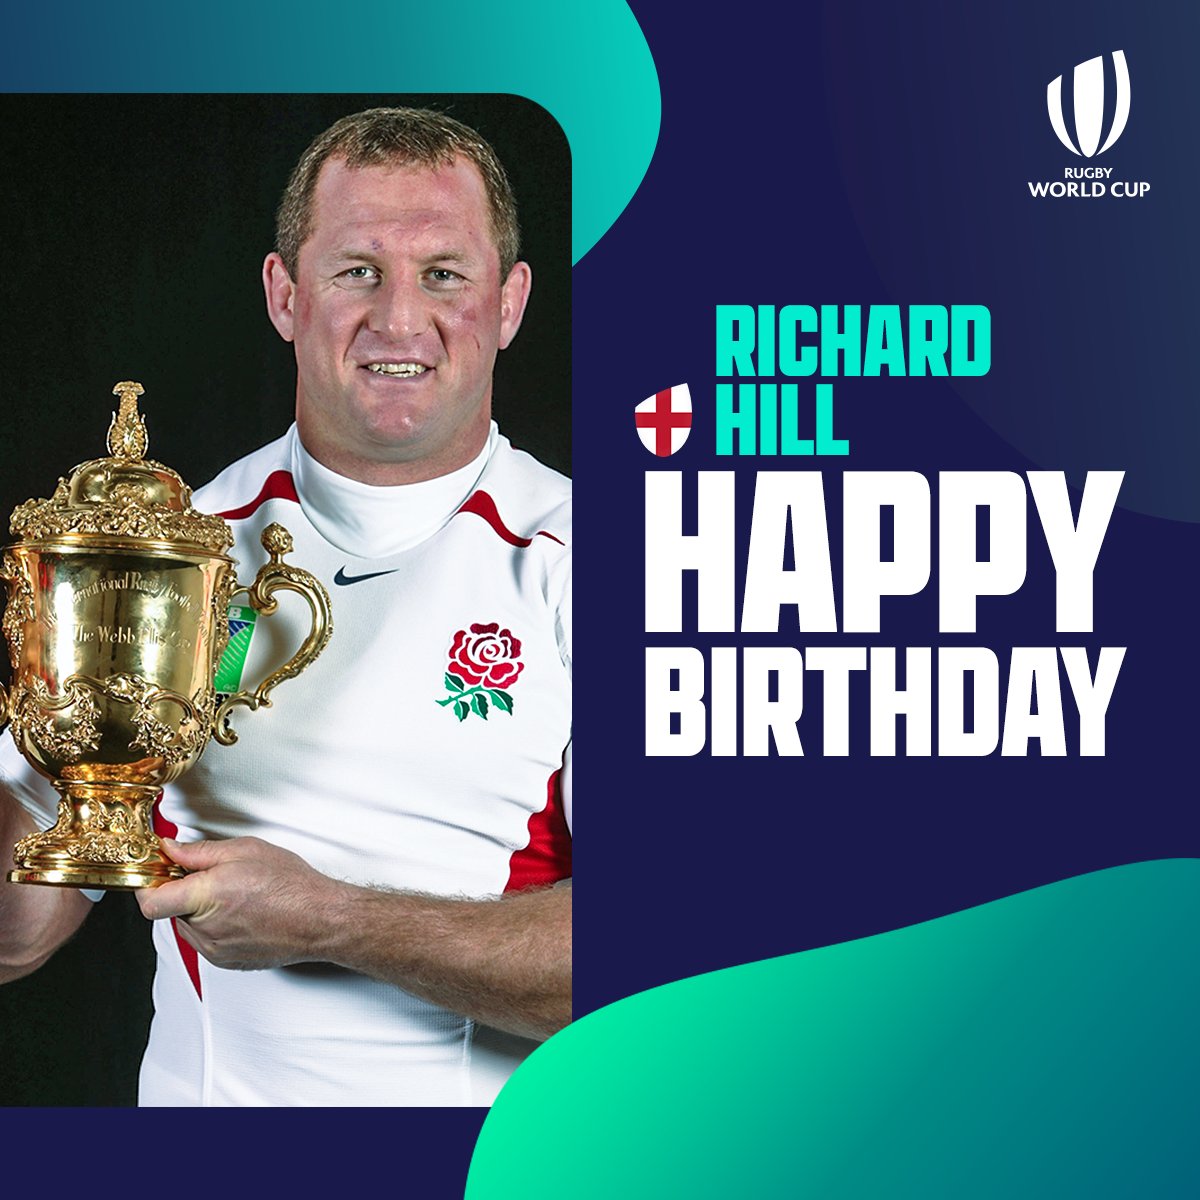 One of greatest players       Happy Birthday to winner, Richard Hill 